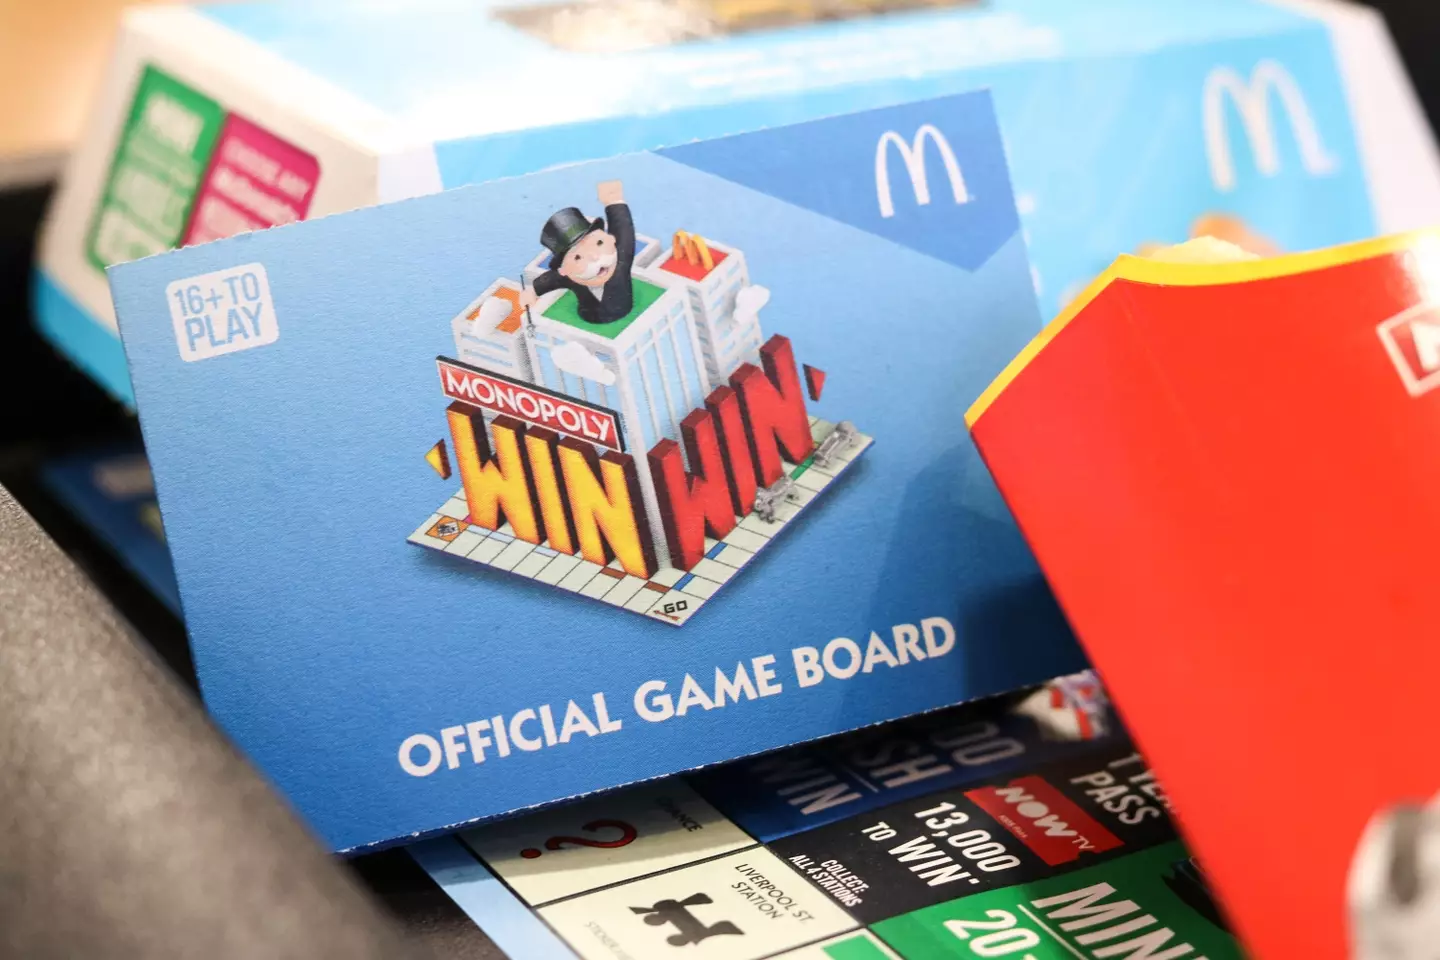 McDonald's Monopoly will be returning.